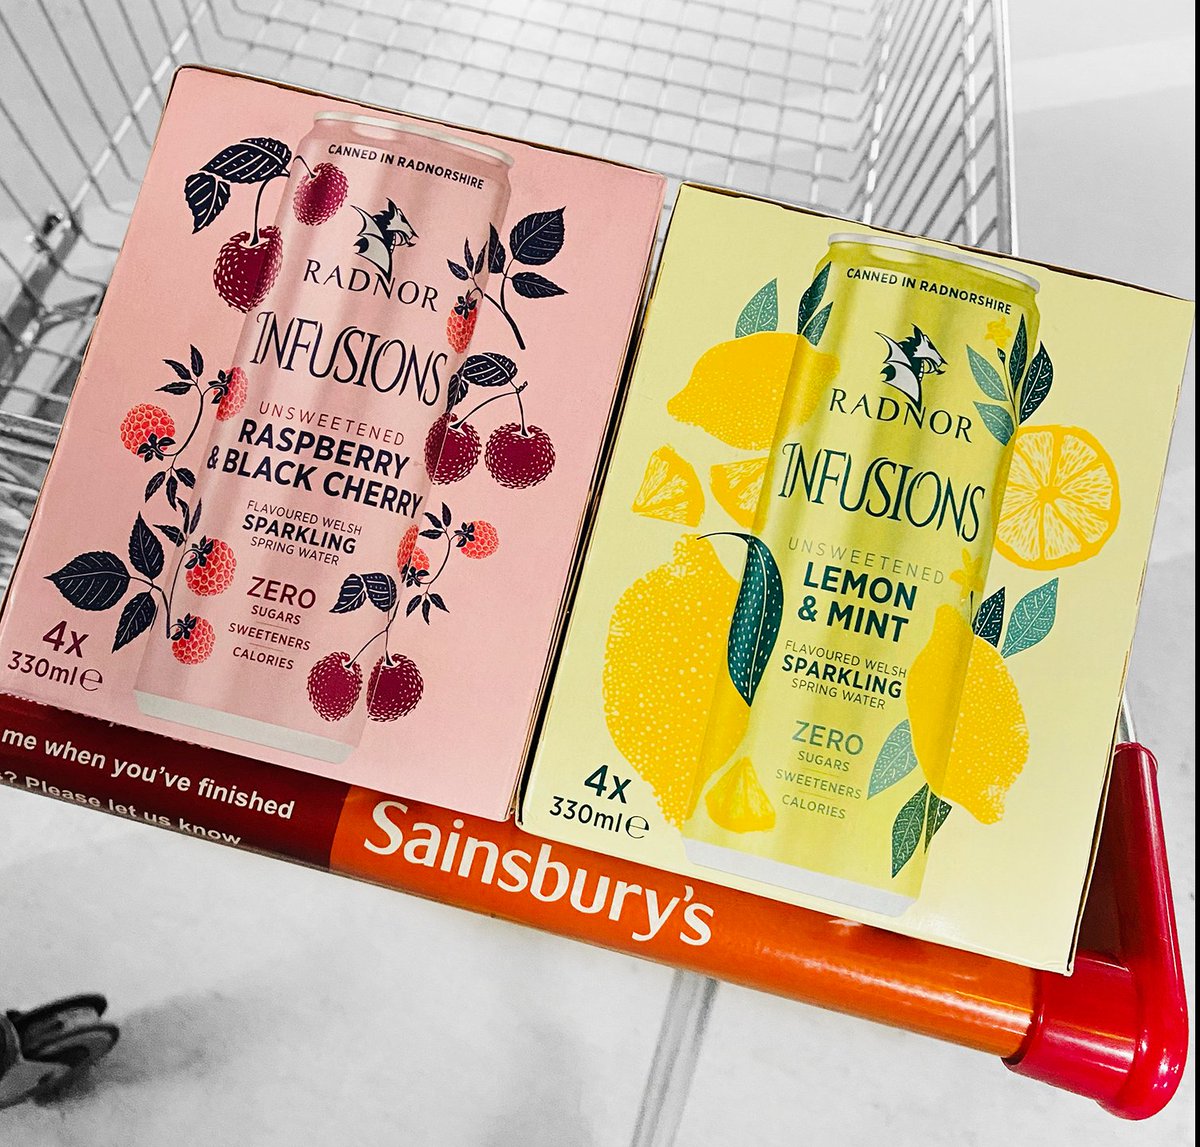 **NEW LISTING** Out first in store listing!! You can now put them in a physical trolley not just an online one! Get down to your nearest Sainsburys! Because our Radnor Infusion 4 packs are now in store!! @sainsburys